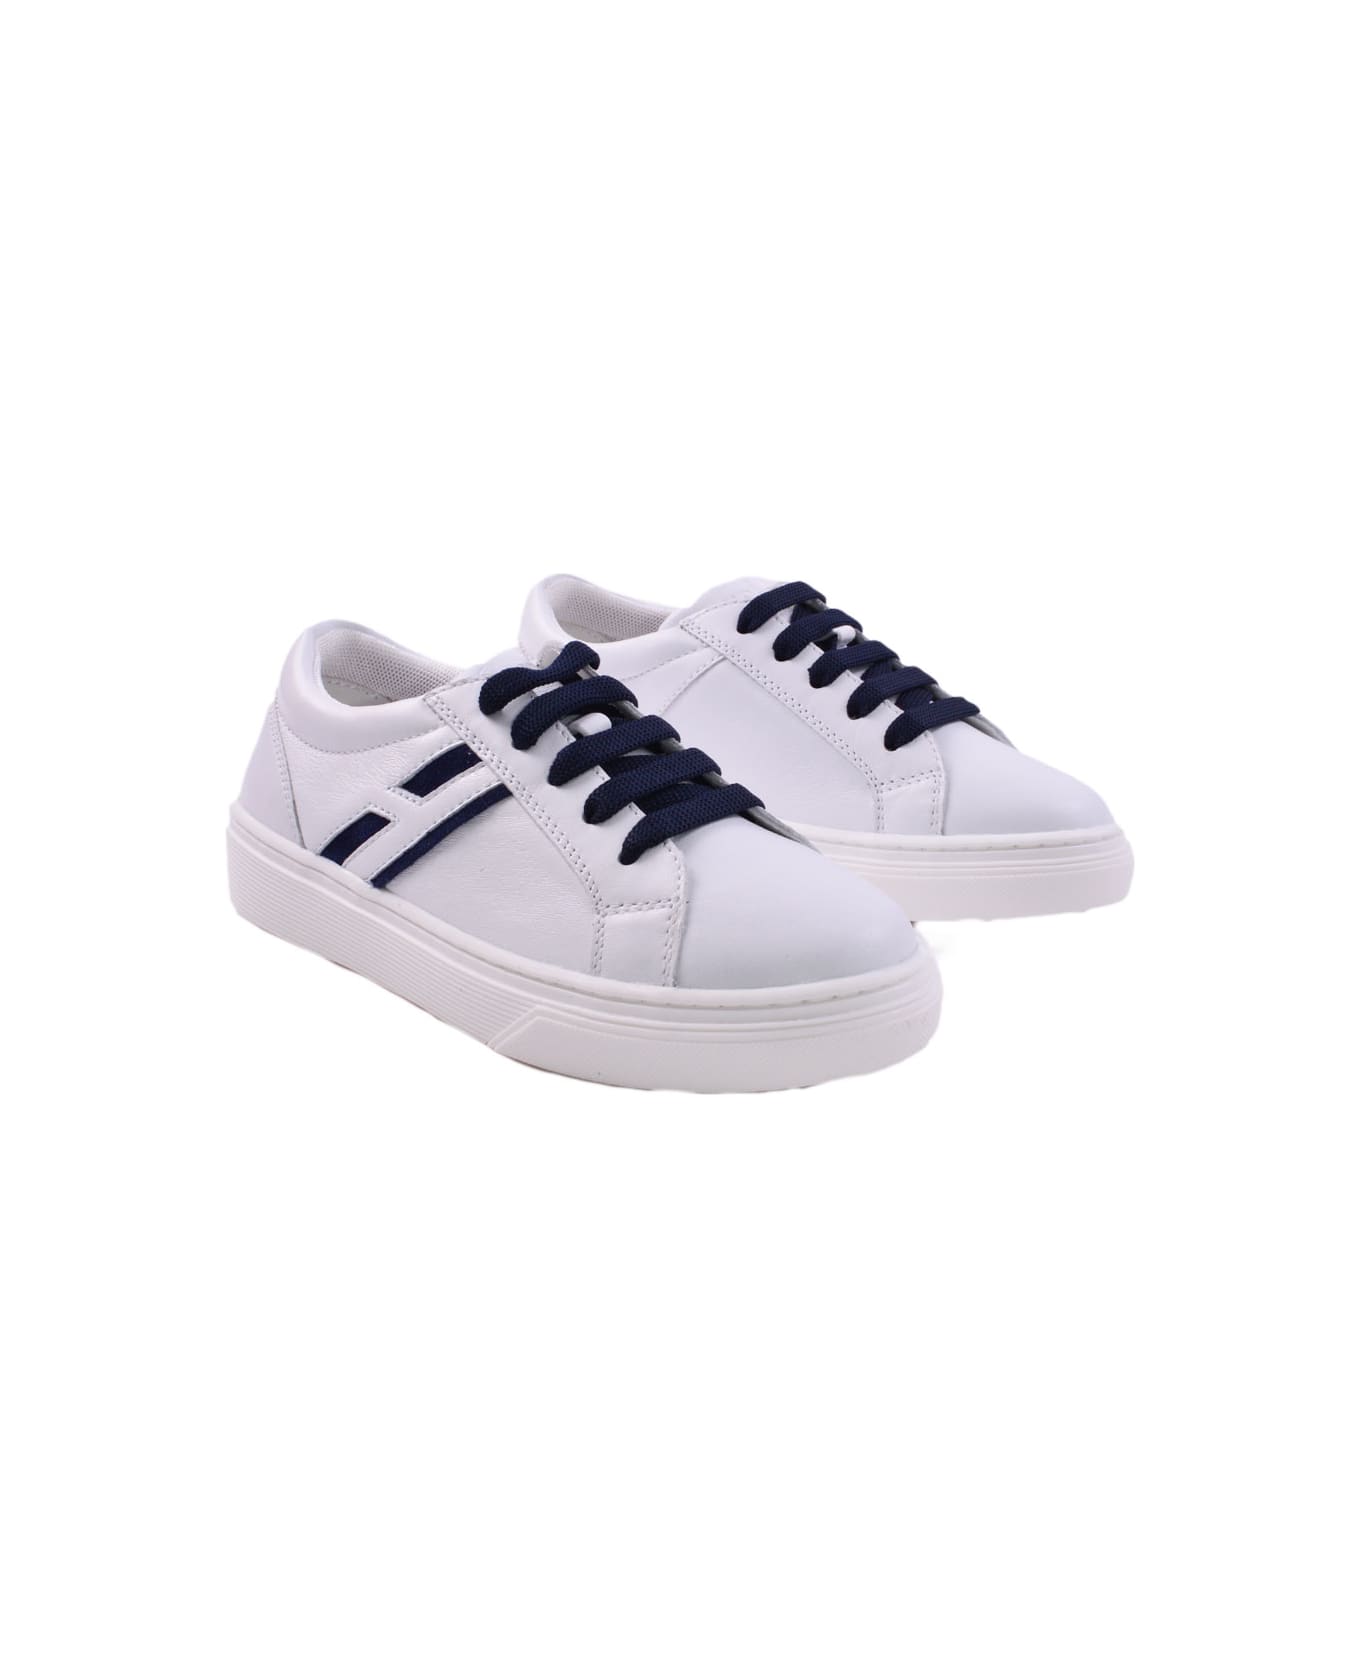 Hogan R365 Sneakers In Leather - White シューズ